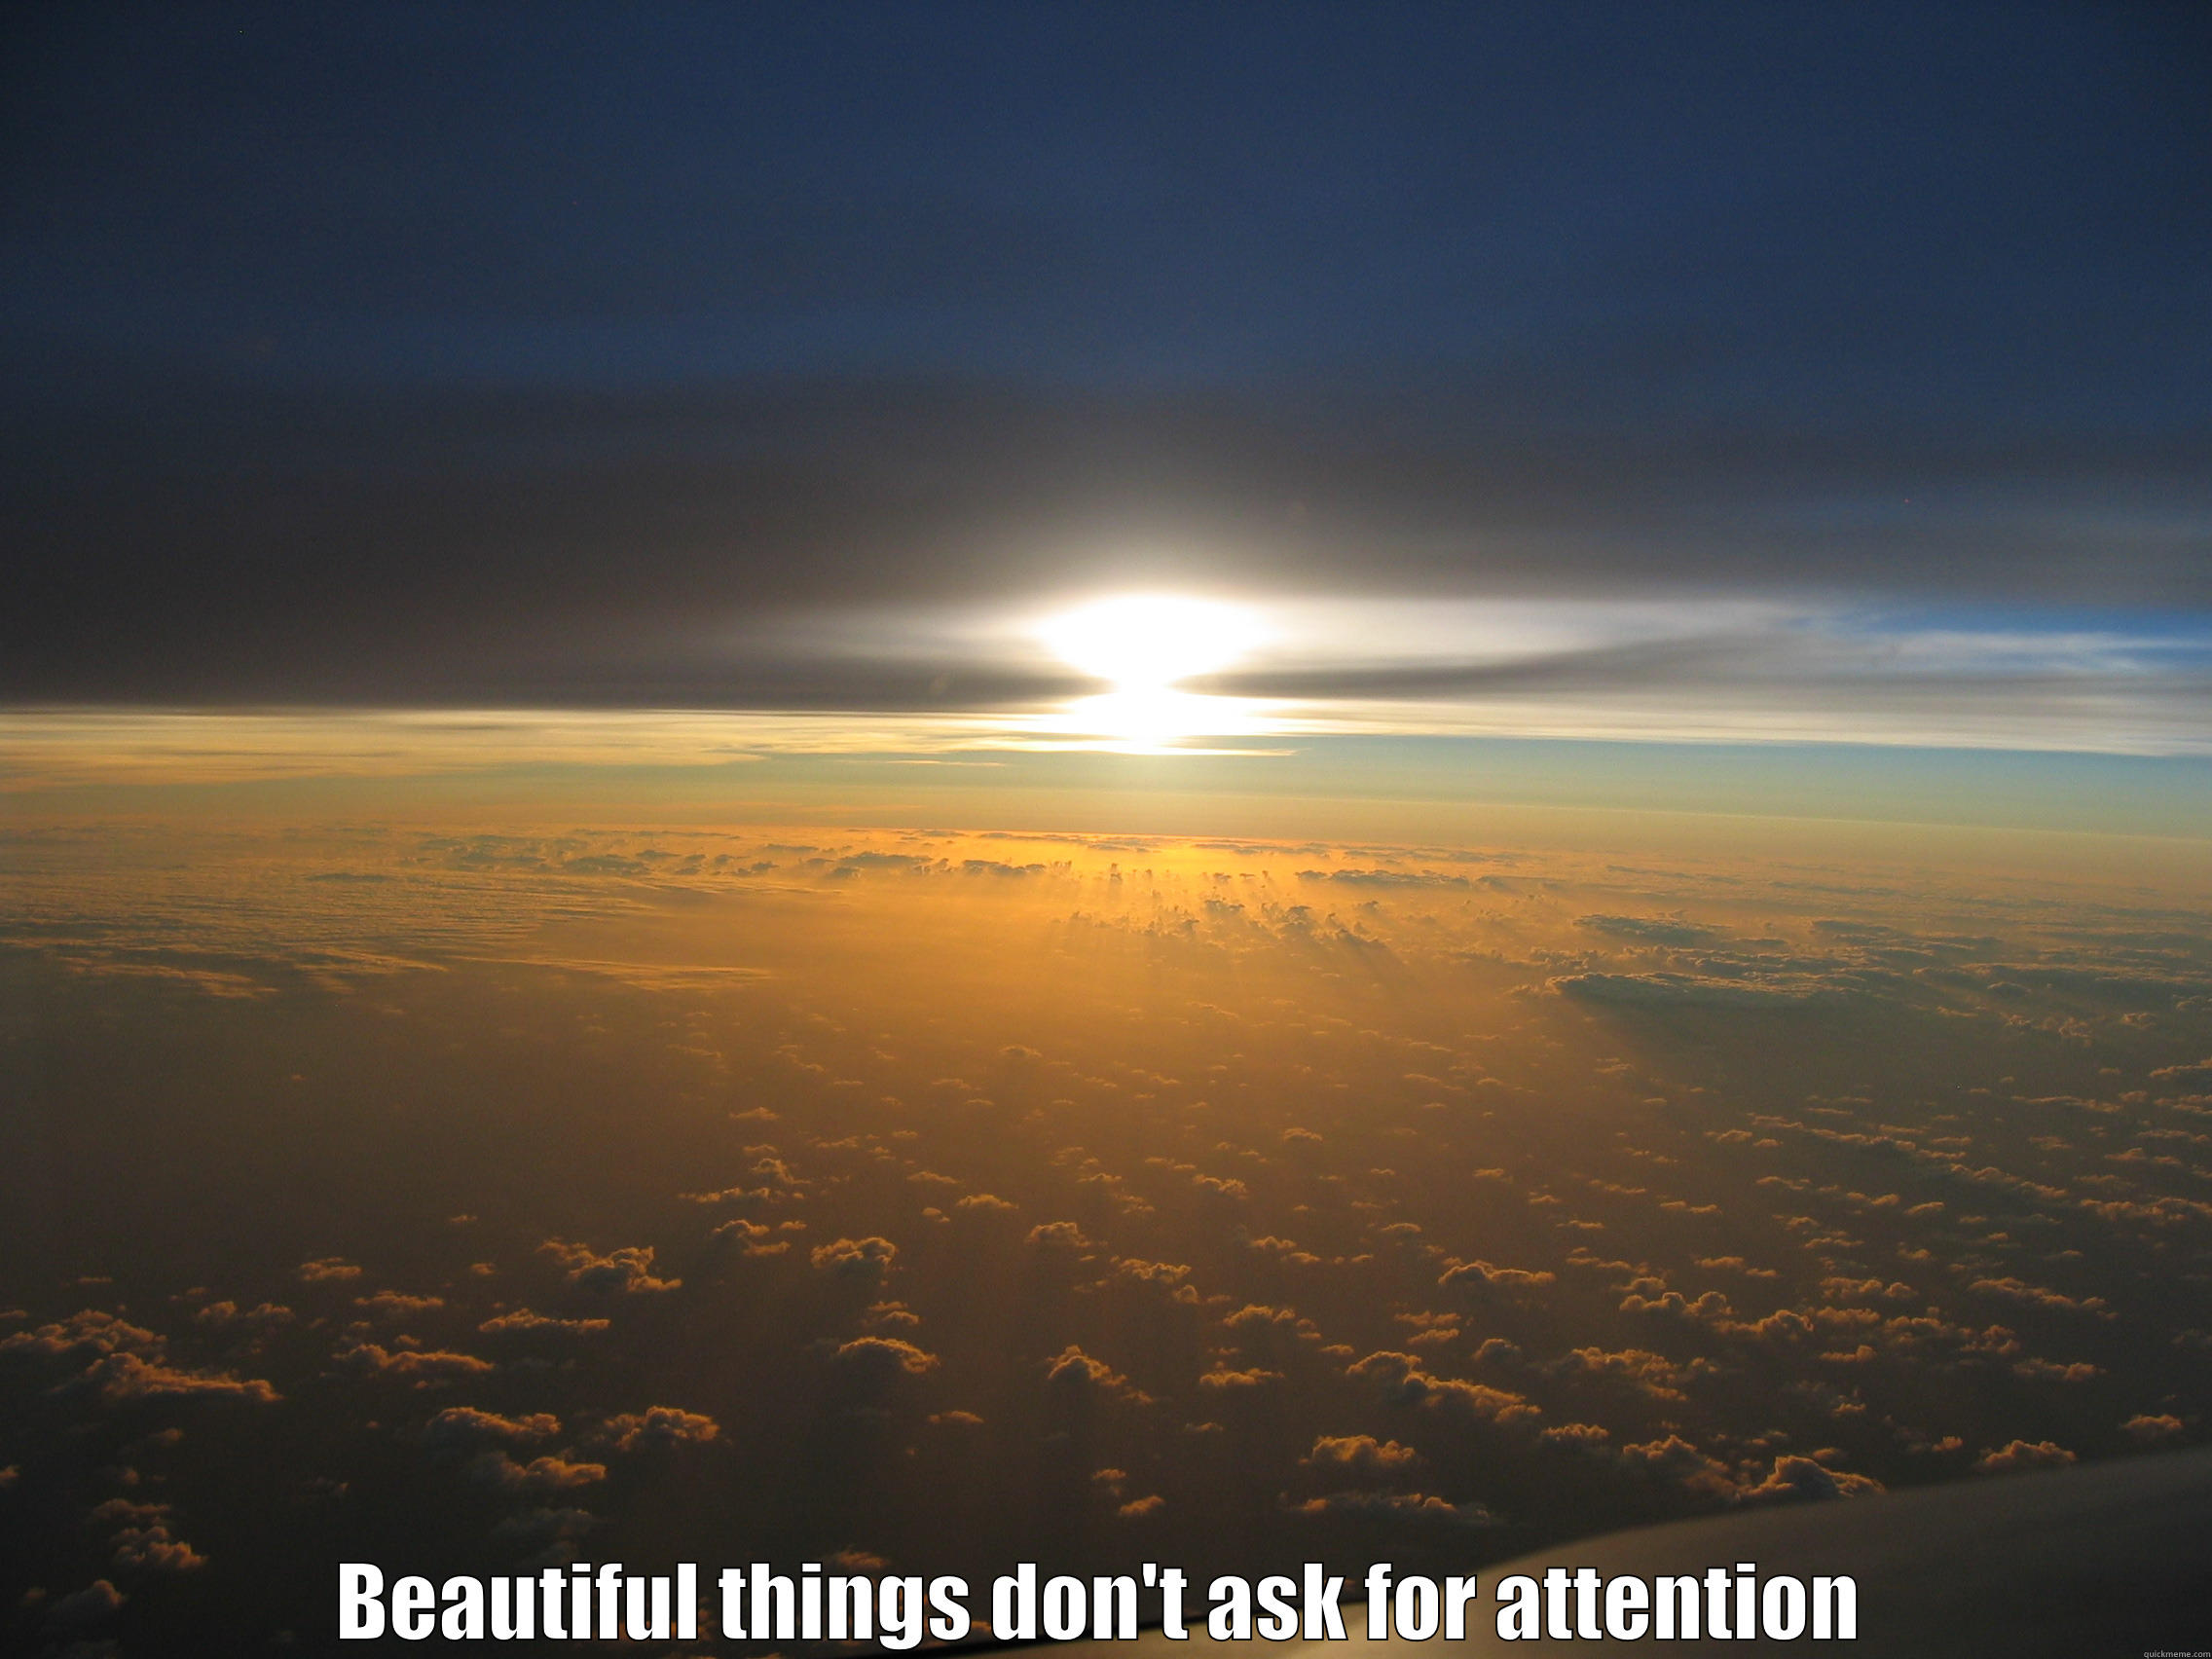  BEAUTIFUL THINGS DON'T ASK FOR ATTENTION Misc